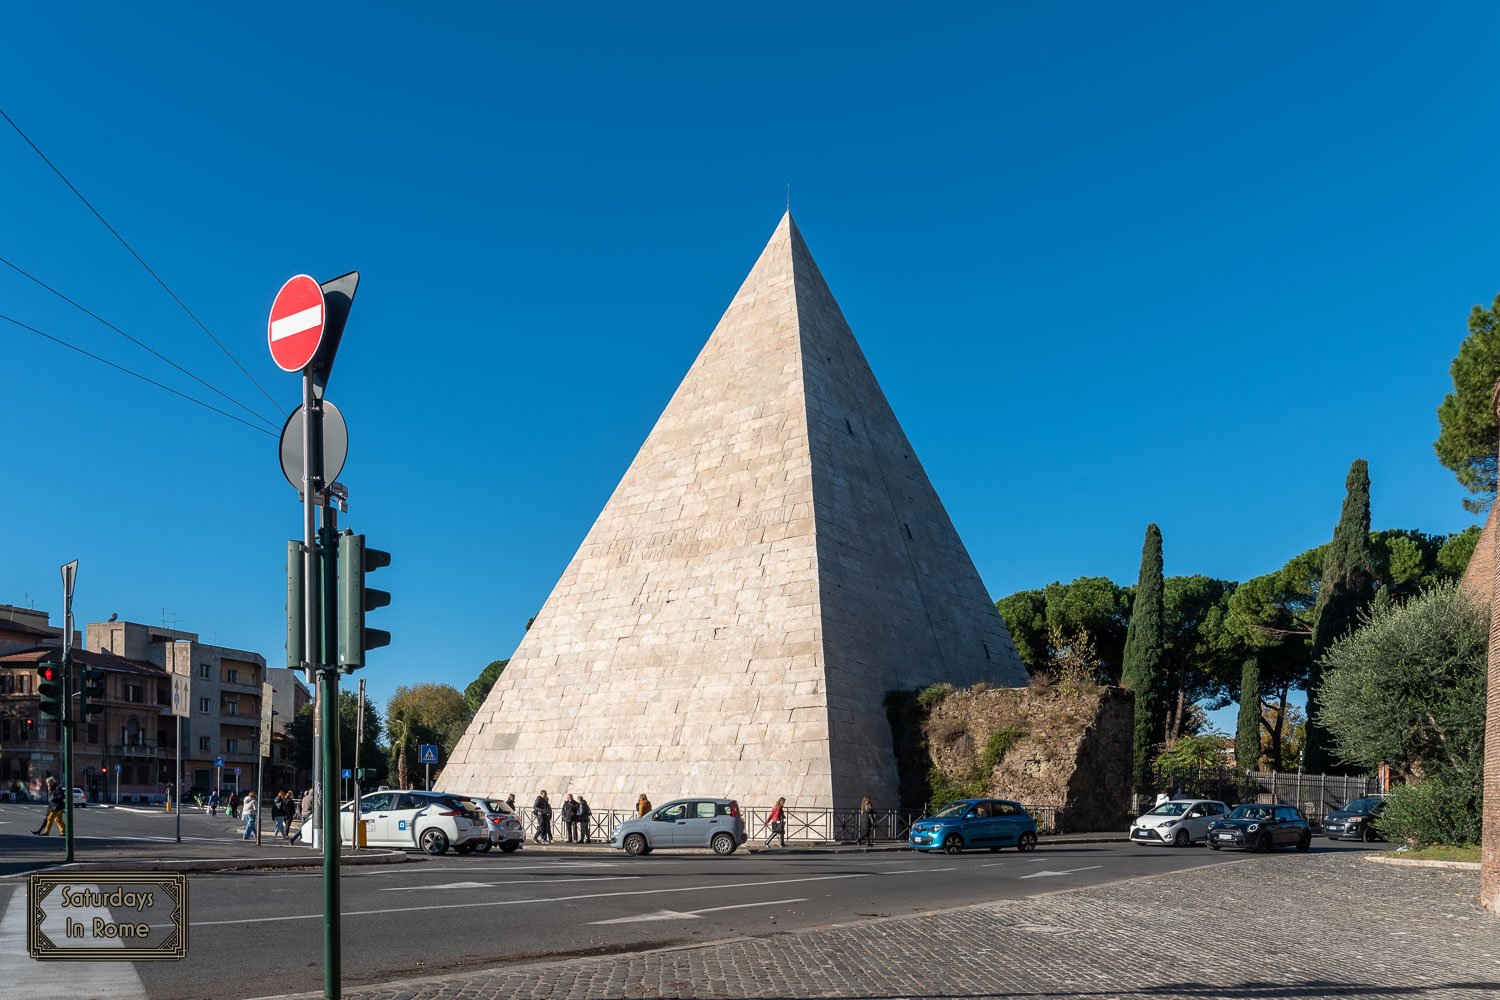 Can You Visit The Pyramid of Cestius?